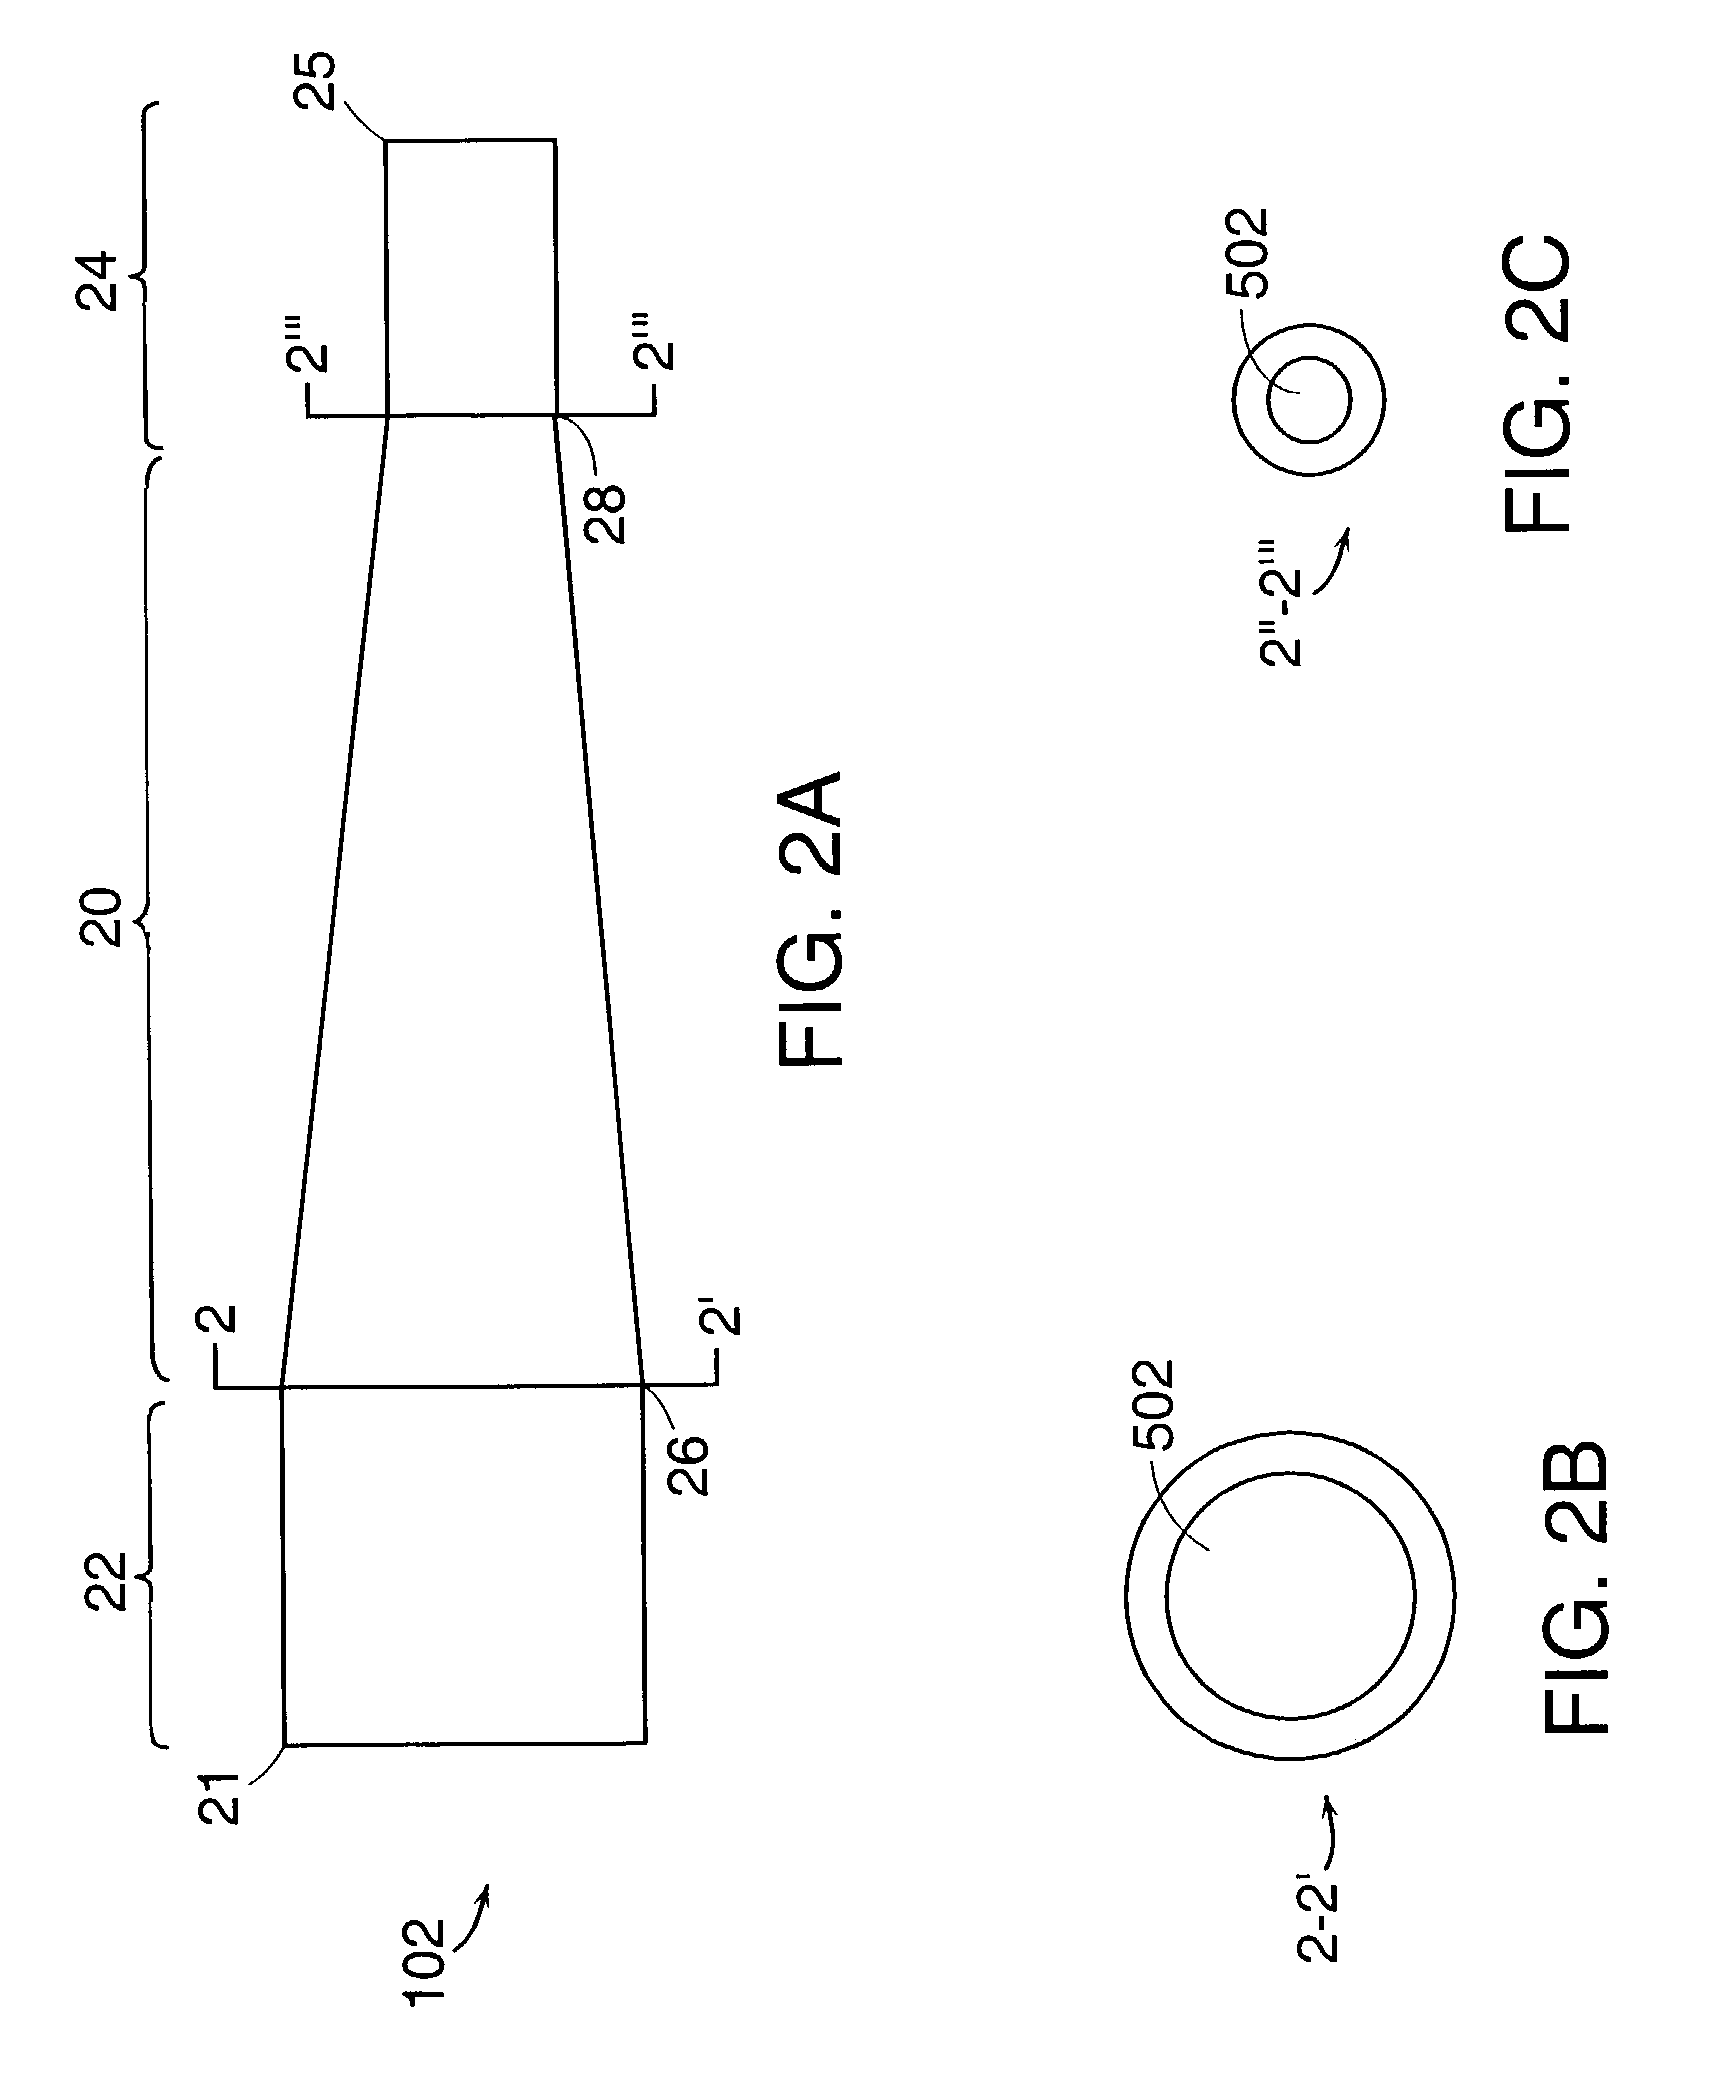 High flow rate dialysis catheters and related methods